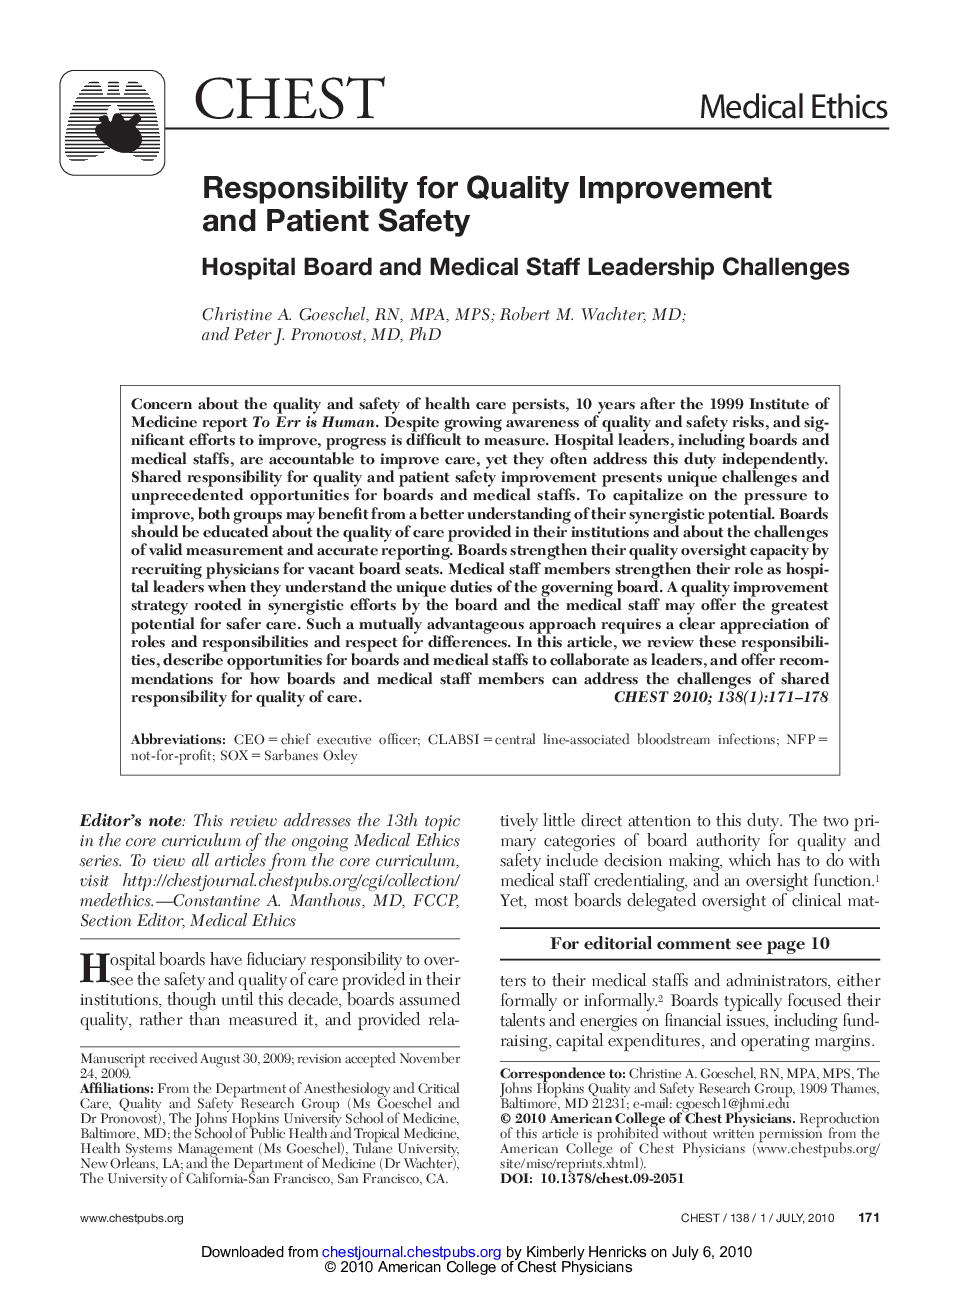 Responsibility for Quality Improvement and Patient Safety